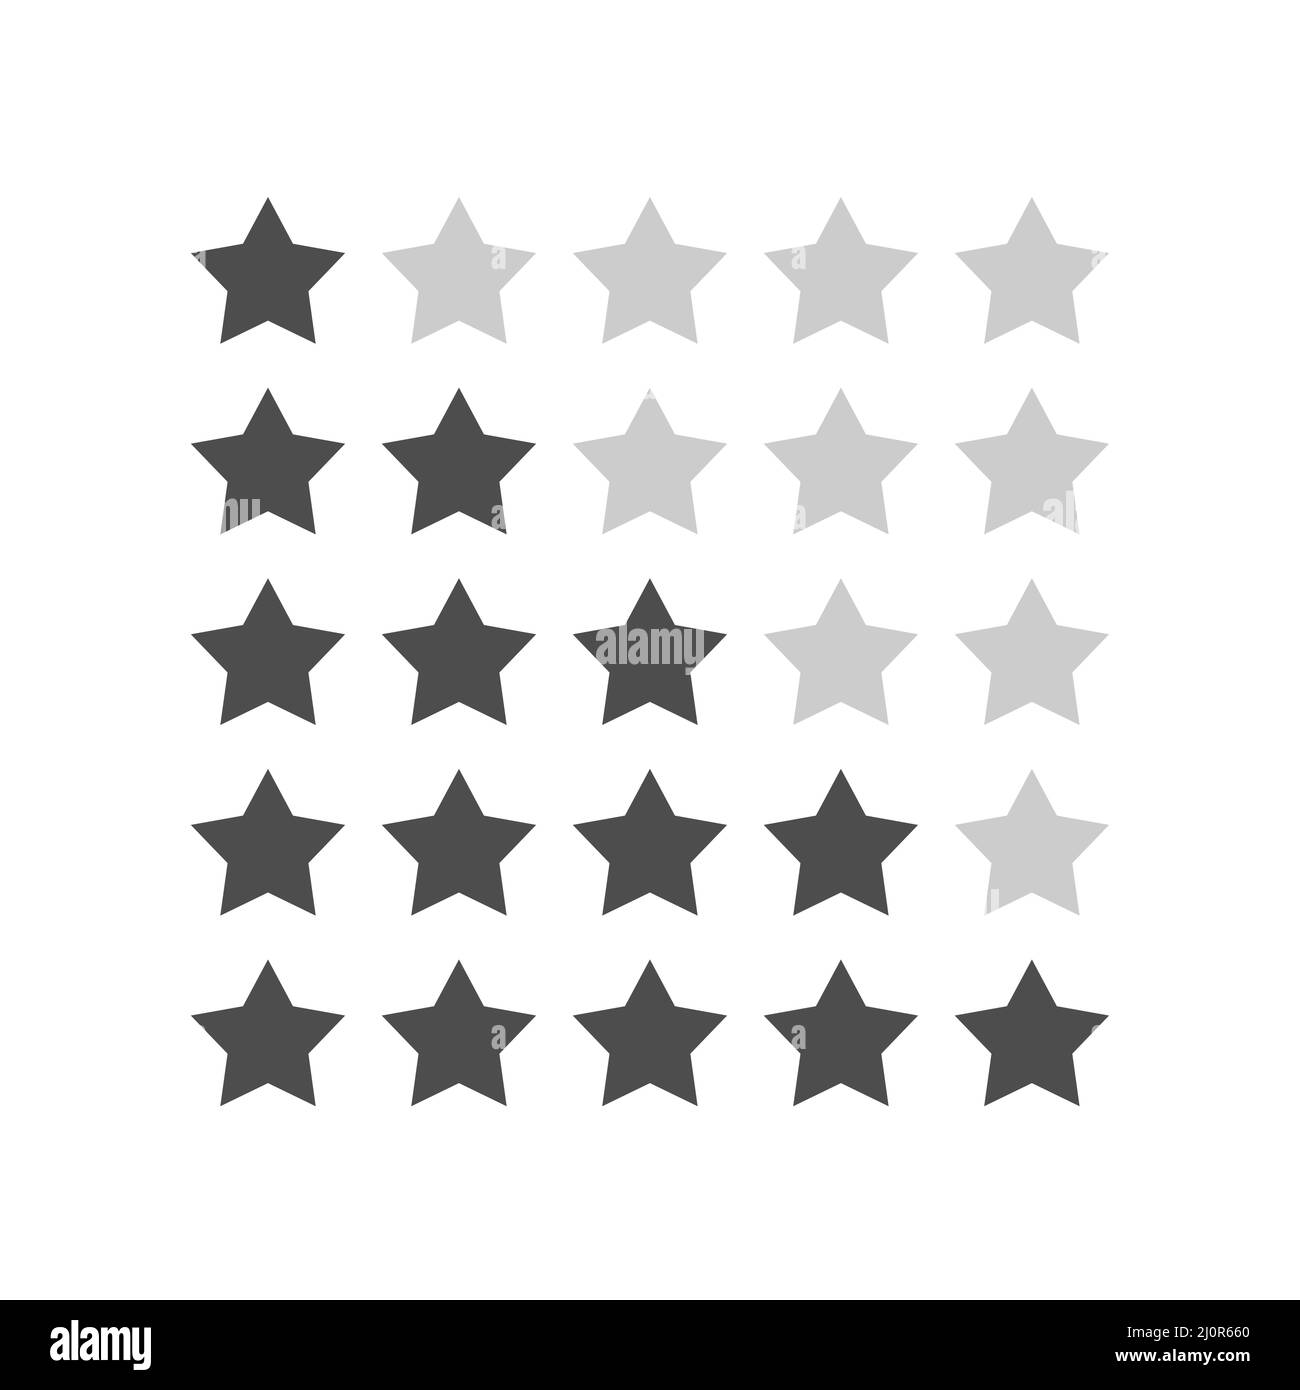 5 star Cut Out Stock Images & Pictures - Alamy